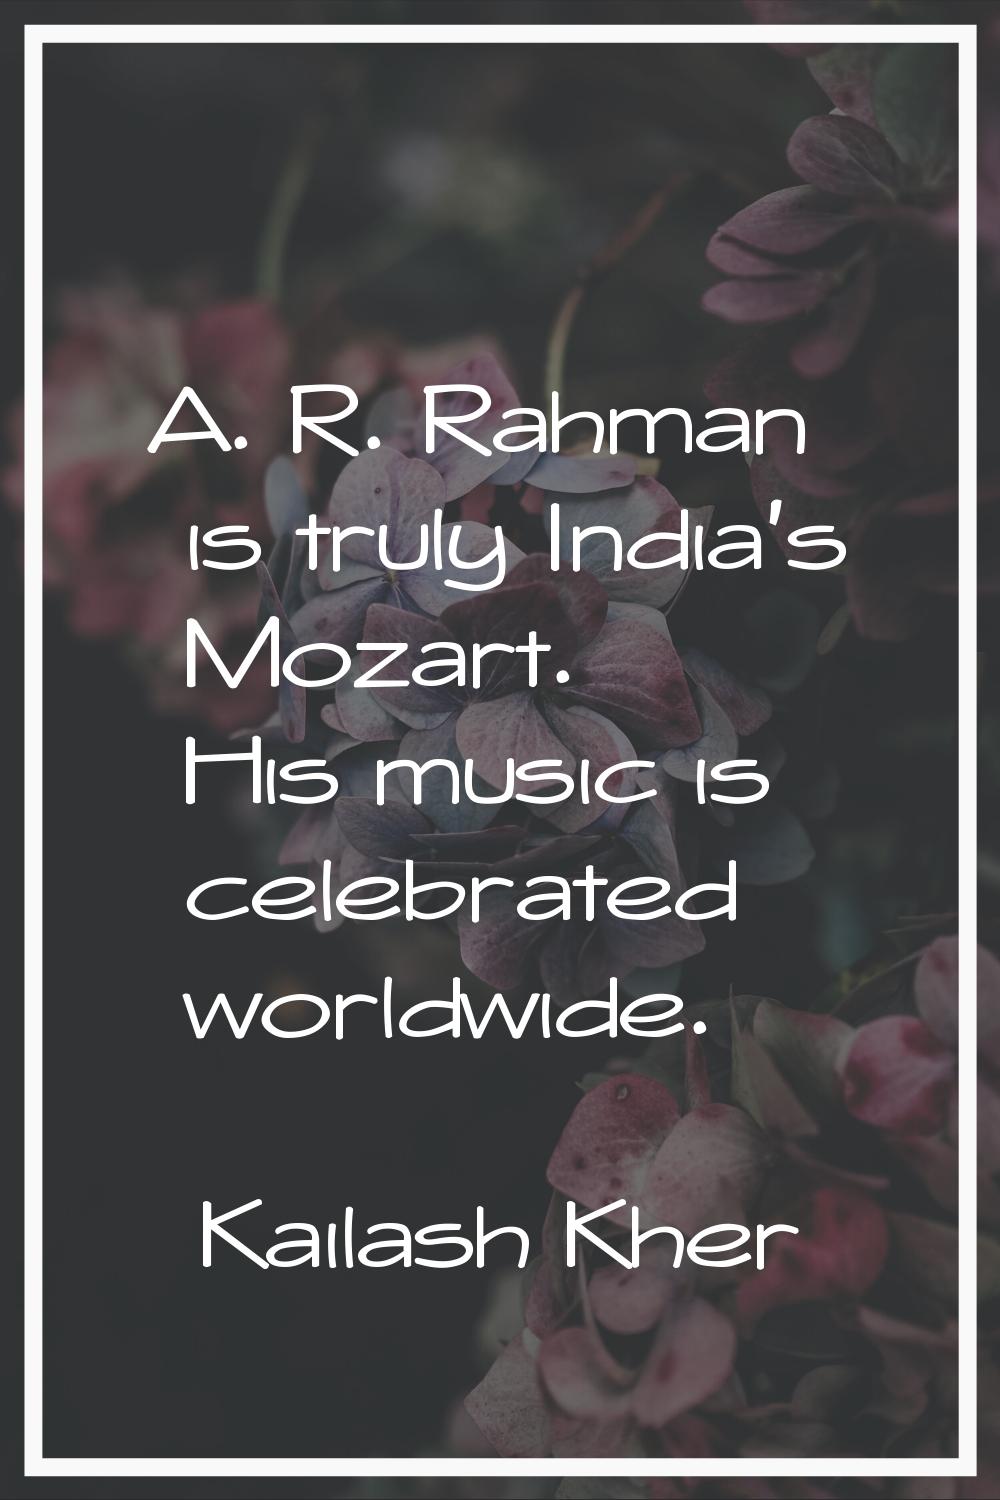 A. R. Rahman is truly India's Mozart. His music is celebrated worldwide.